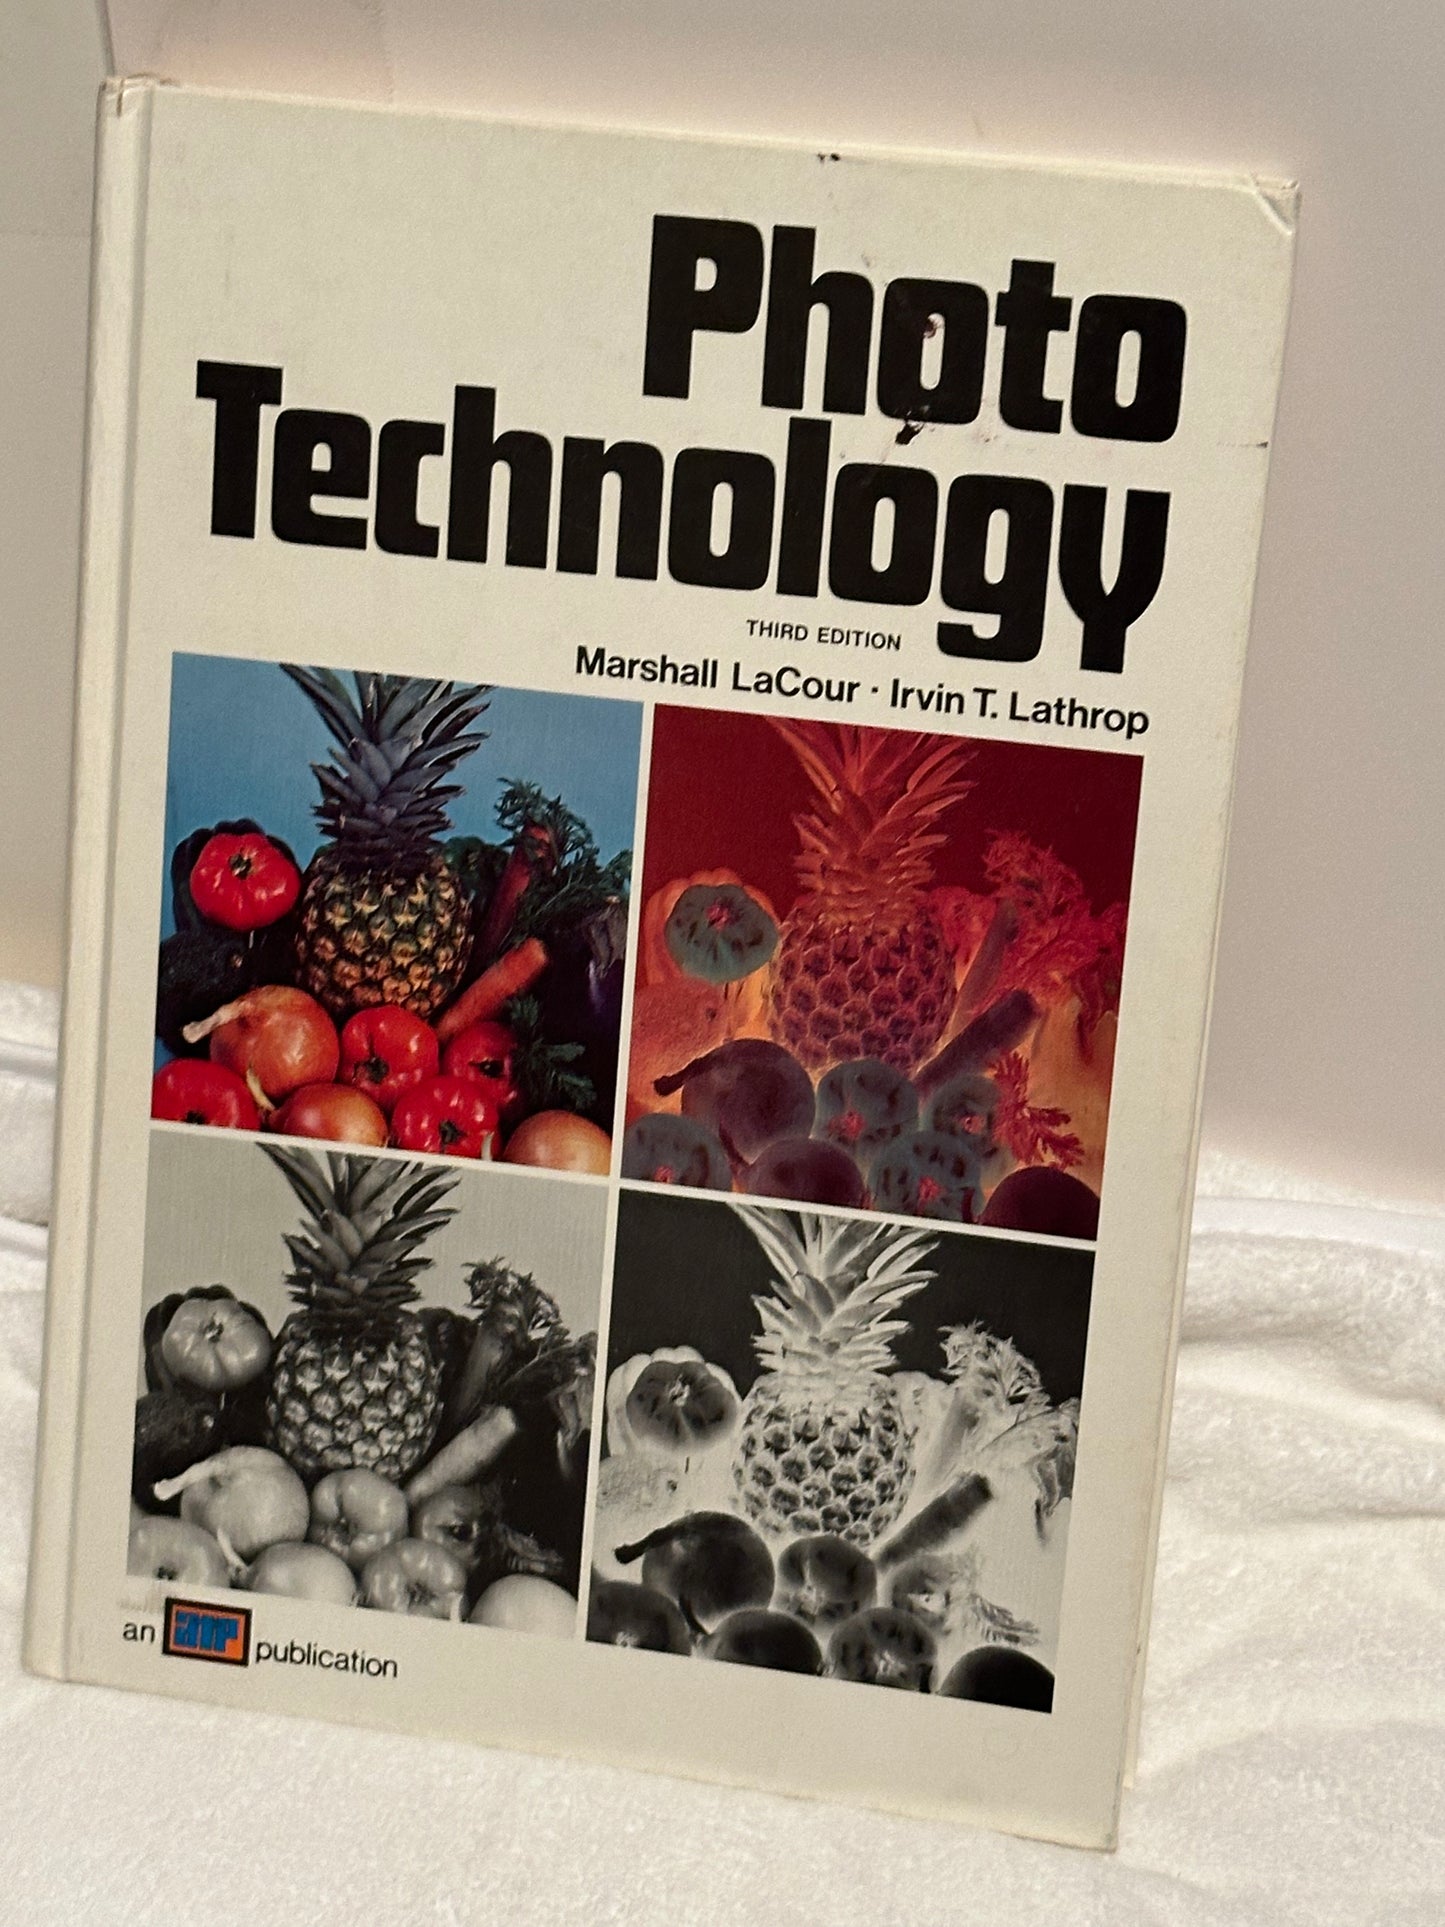 Photo Technology: Third Edition - Hardcover Book by Marshall Lacour and Irvin T. Lathrop